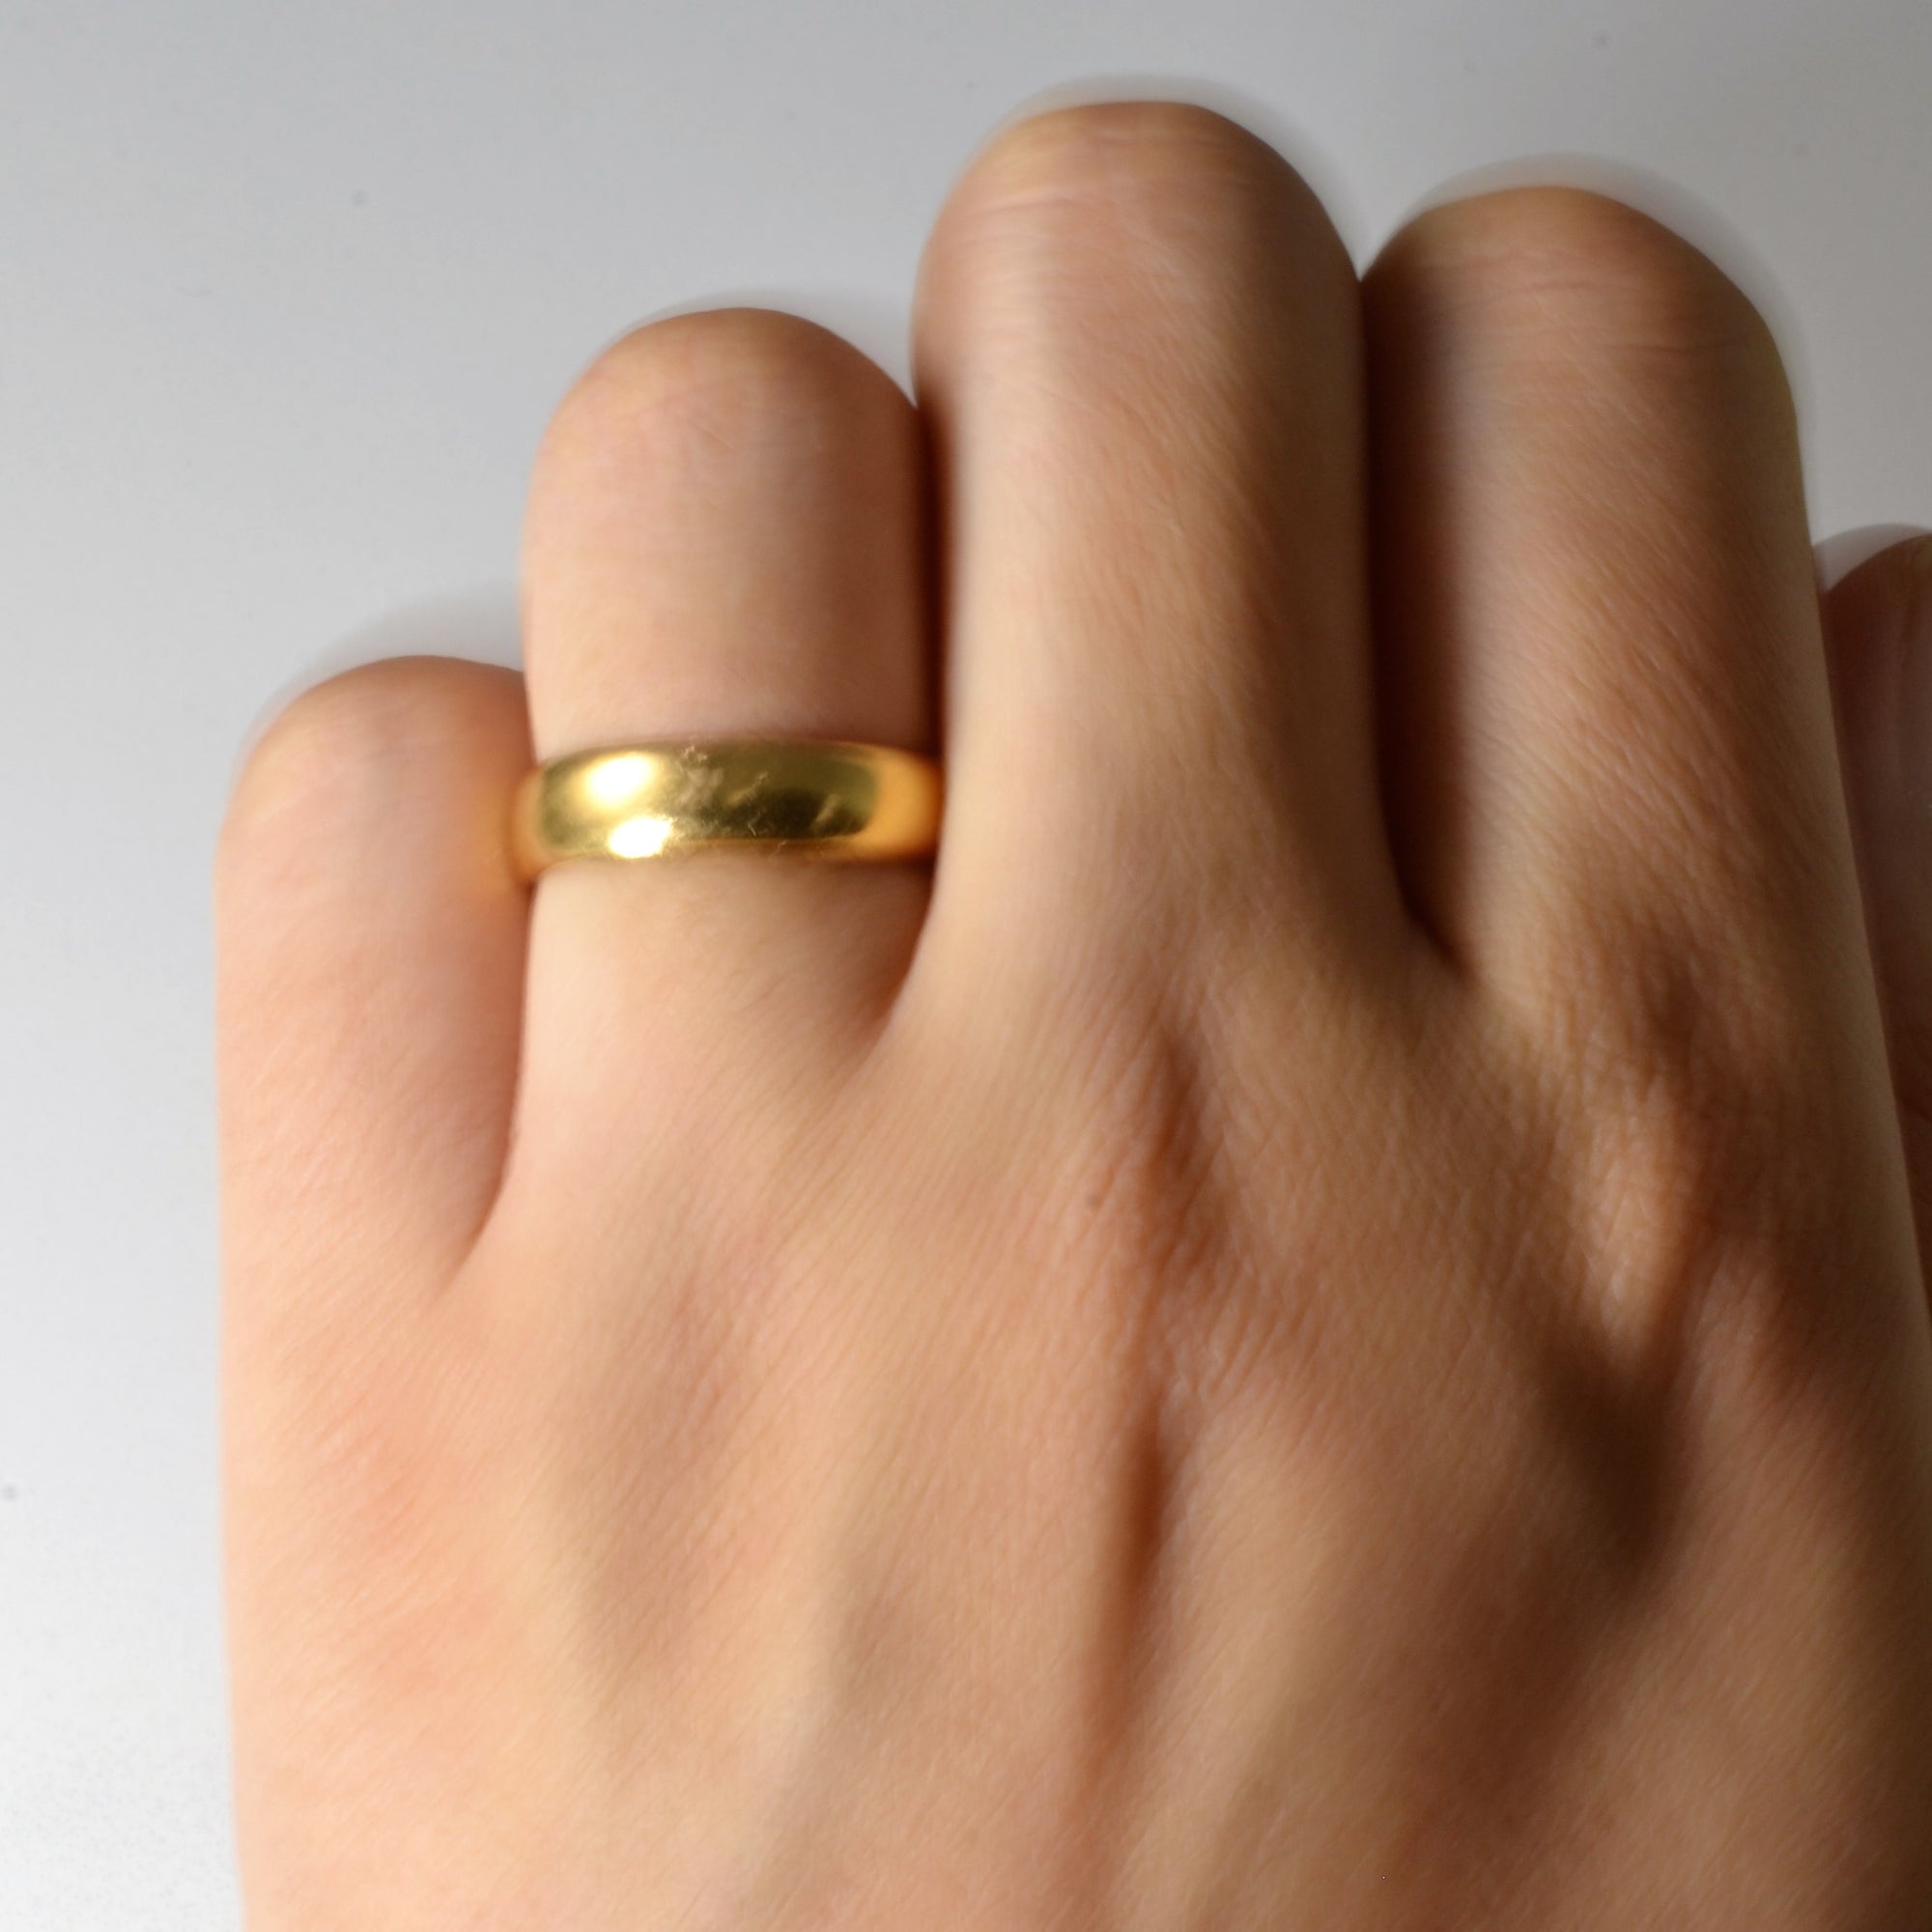 Early 1900s Yellow Gold Band | SZ 6 |